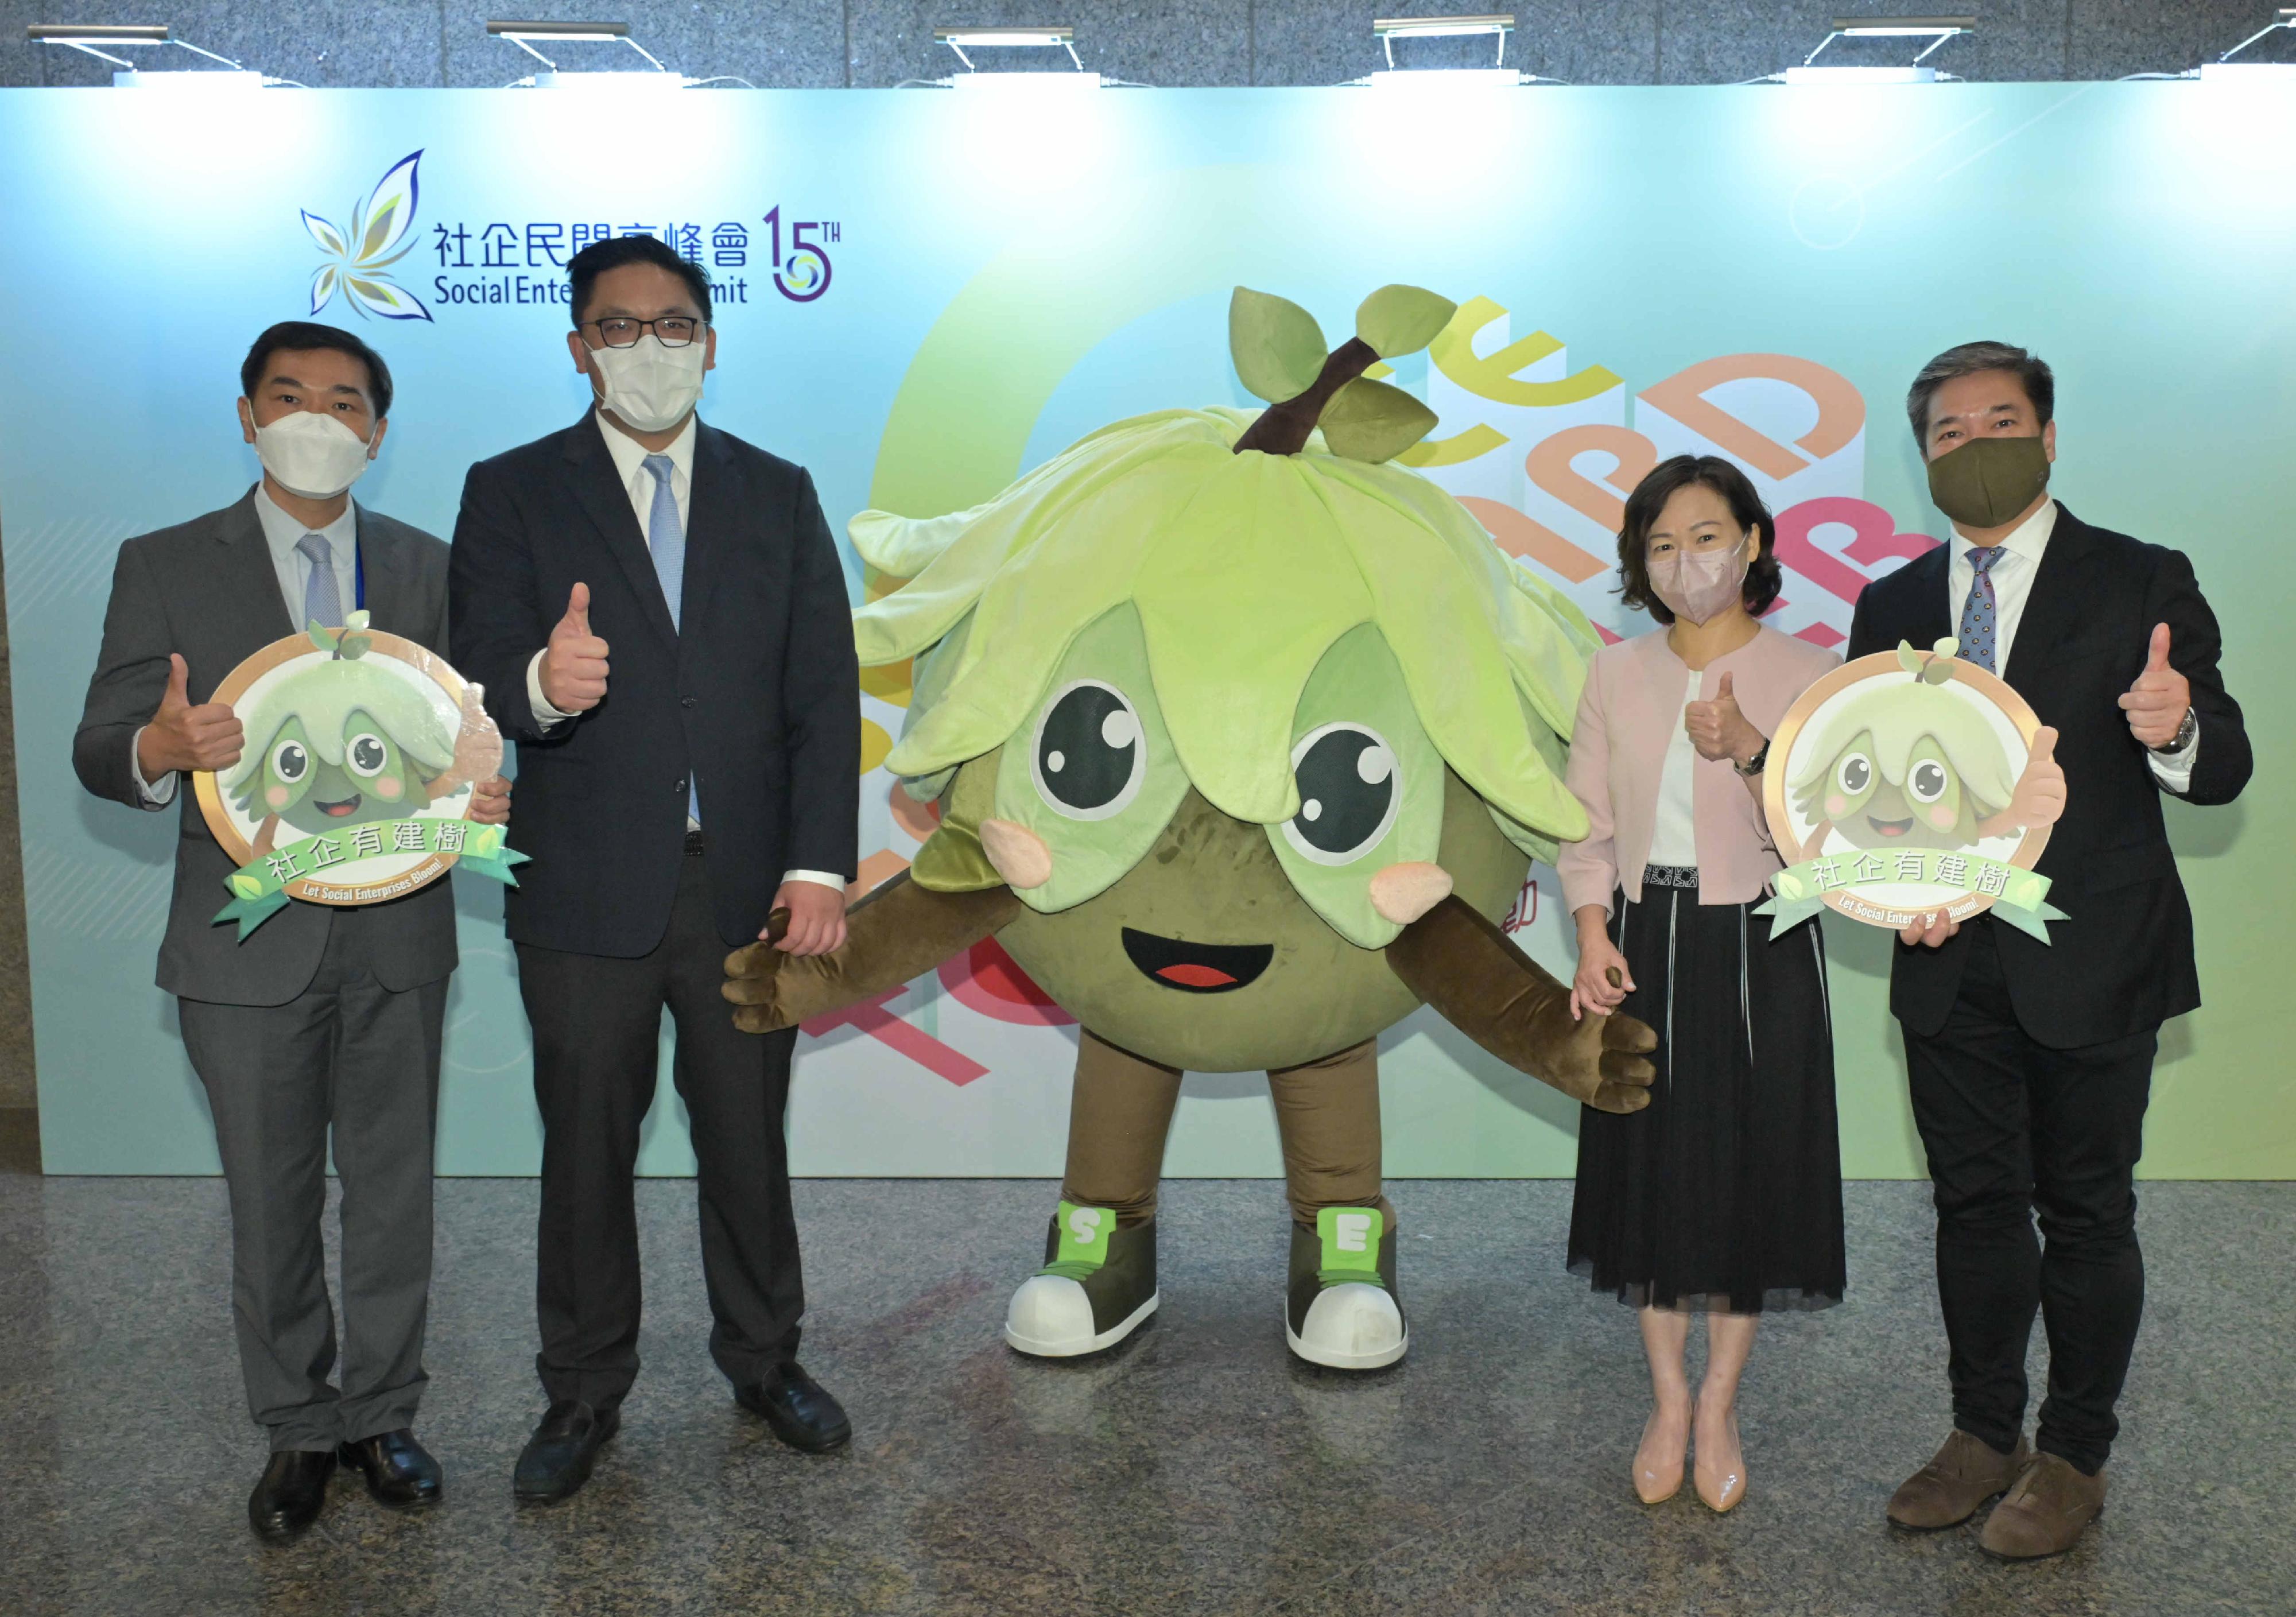 The Chief Secretary for Administration, Mr Chan Kwok-ki, unveiled the new social enterprise mascot, Bloomy the Tree, at the opening ceremony of the Social Enterprise Summit 2022 today (November 24). Photo shows (from left) the Chairman of the Advisory Committee on the Enhancing Self-Reliance through District Partnership Programme, Mr Ricky Wong; the Under Secretary for Home and Youth Affairs, Mr Clarence Leung; Bloomy the Tree; the Director of Home Affairs, Mrs Alice Cheung; and the Chairperson of the Hong Kong Social Entrepreneurship Forum, Mr Alan Cheung, at the opening ceremony. 